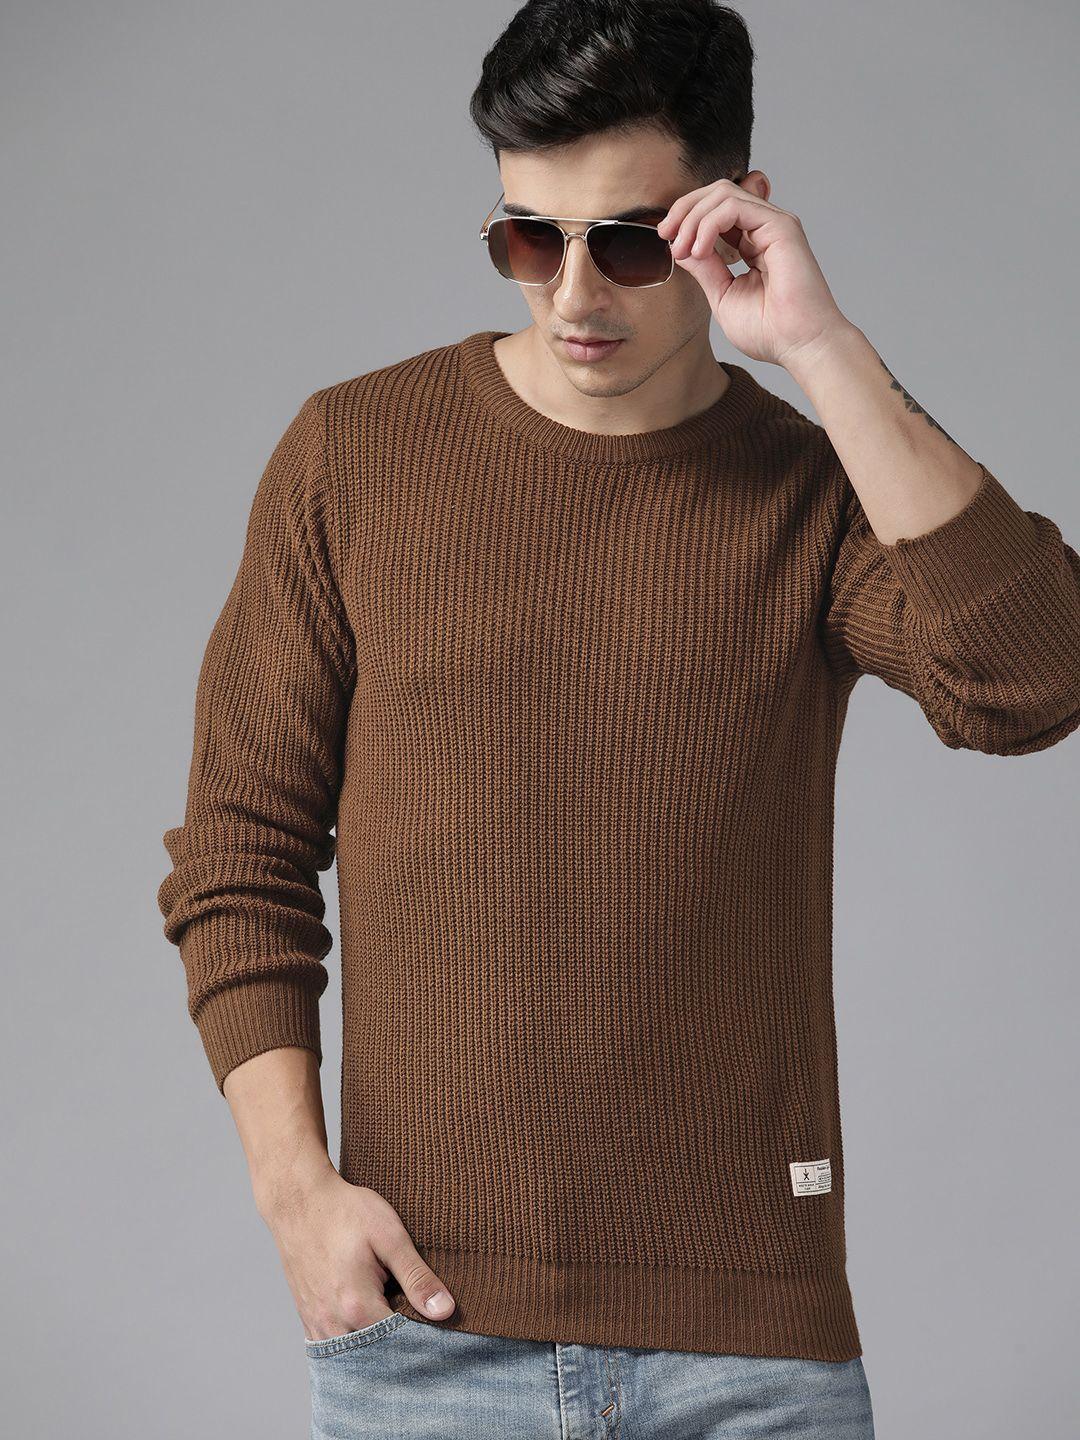 the roadster lifestyle co. acrylic ribbed pullover